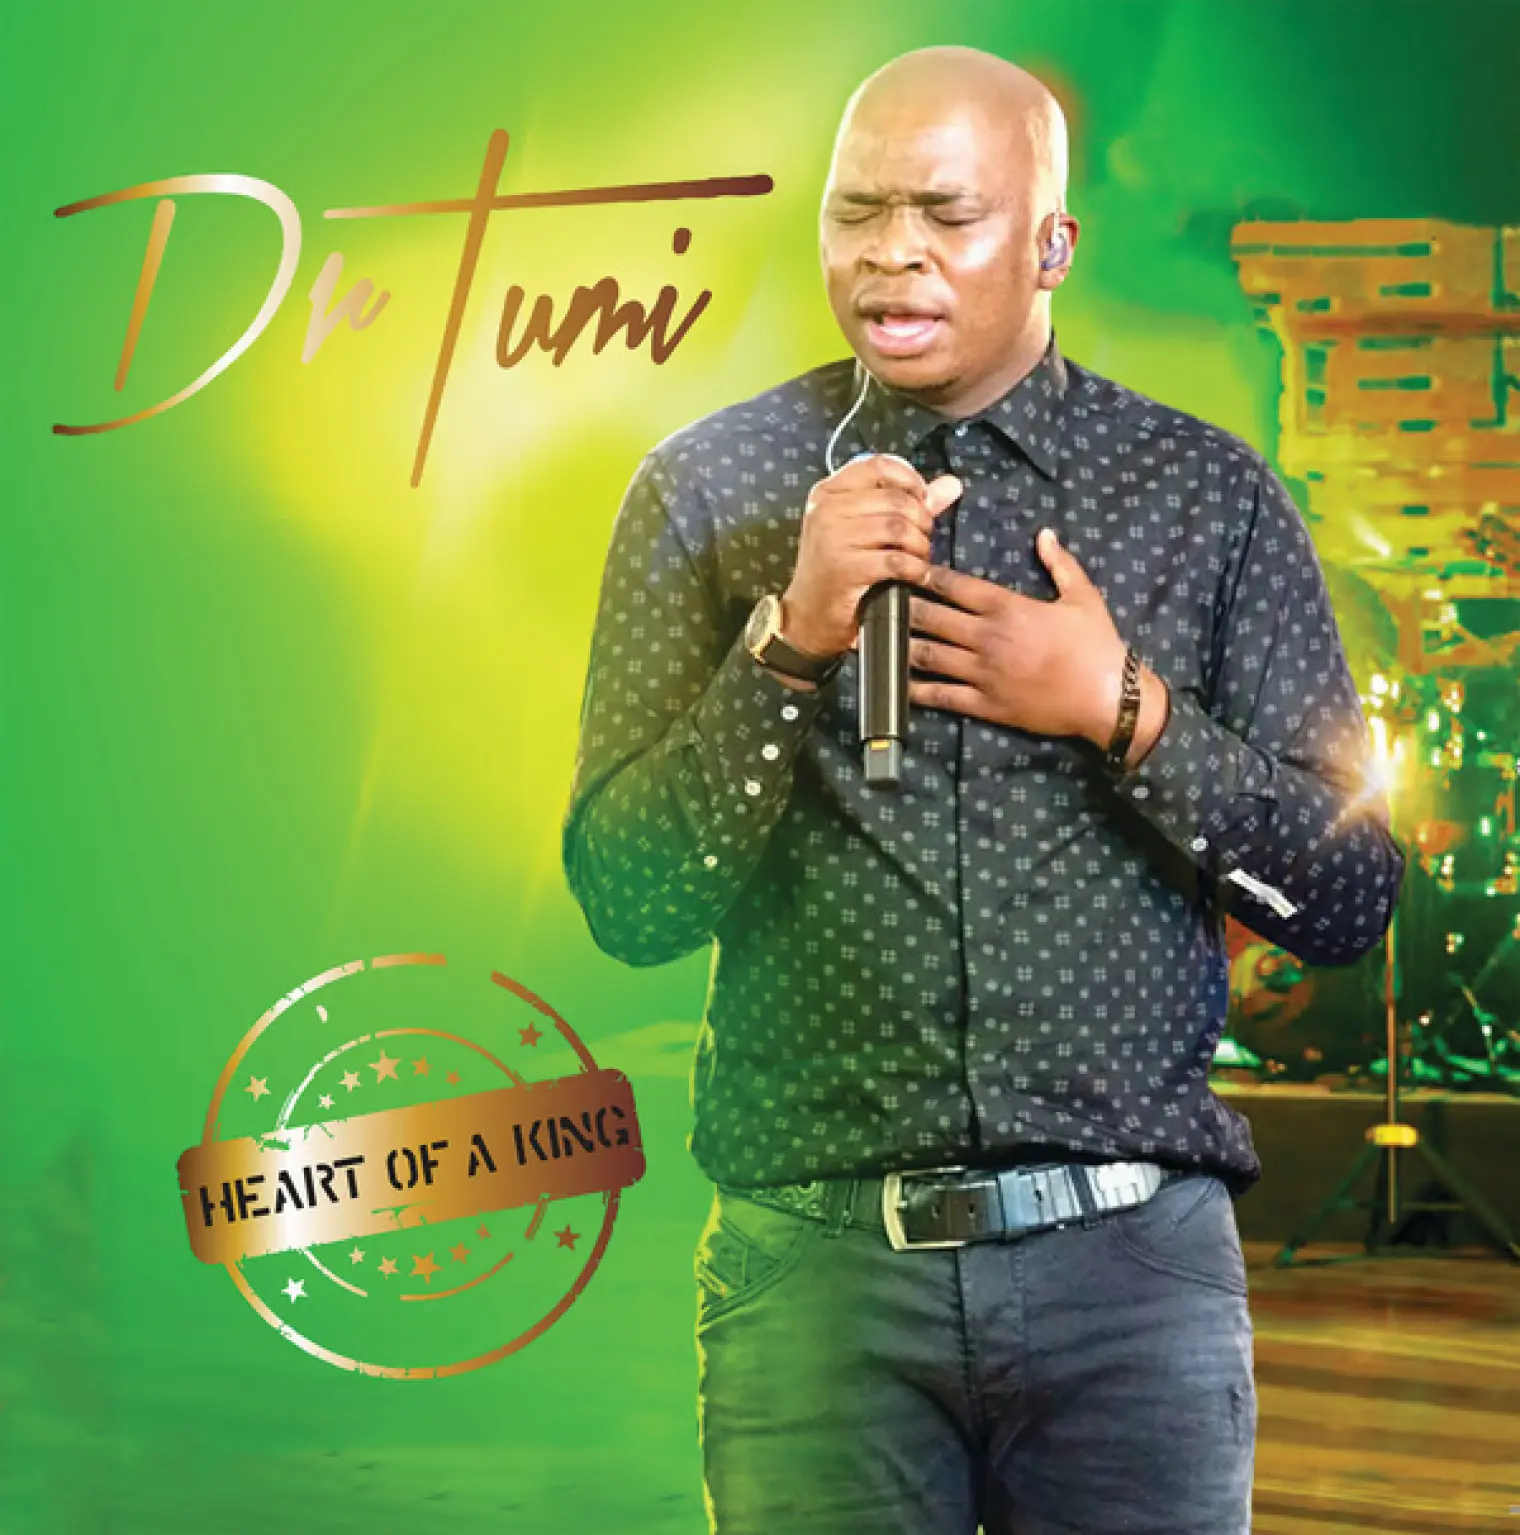 Heart Of A King -  Dr Tumi 